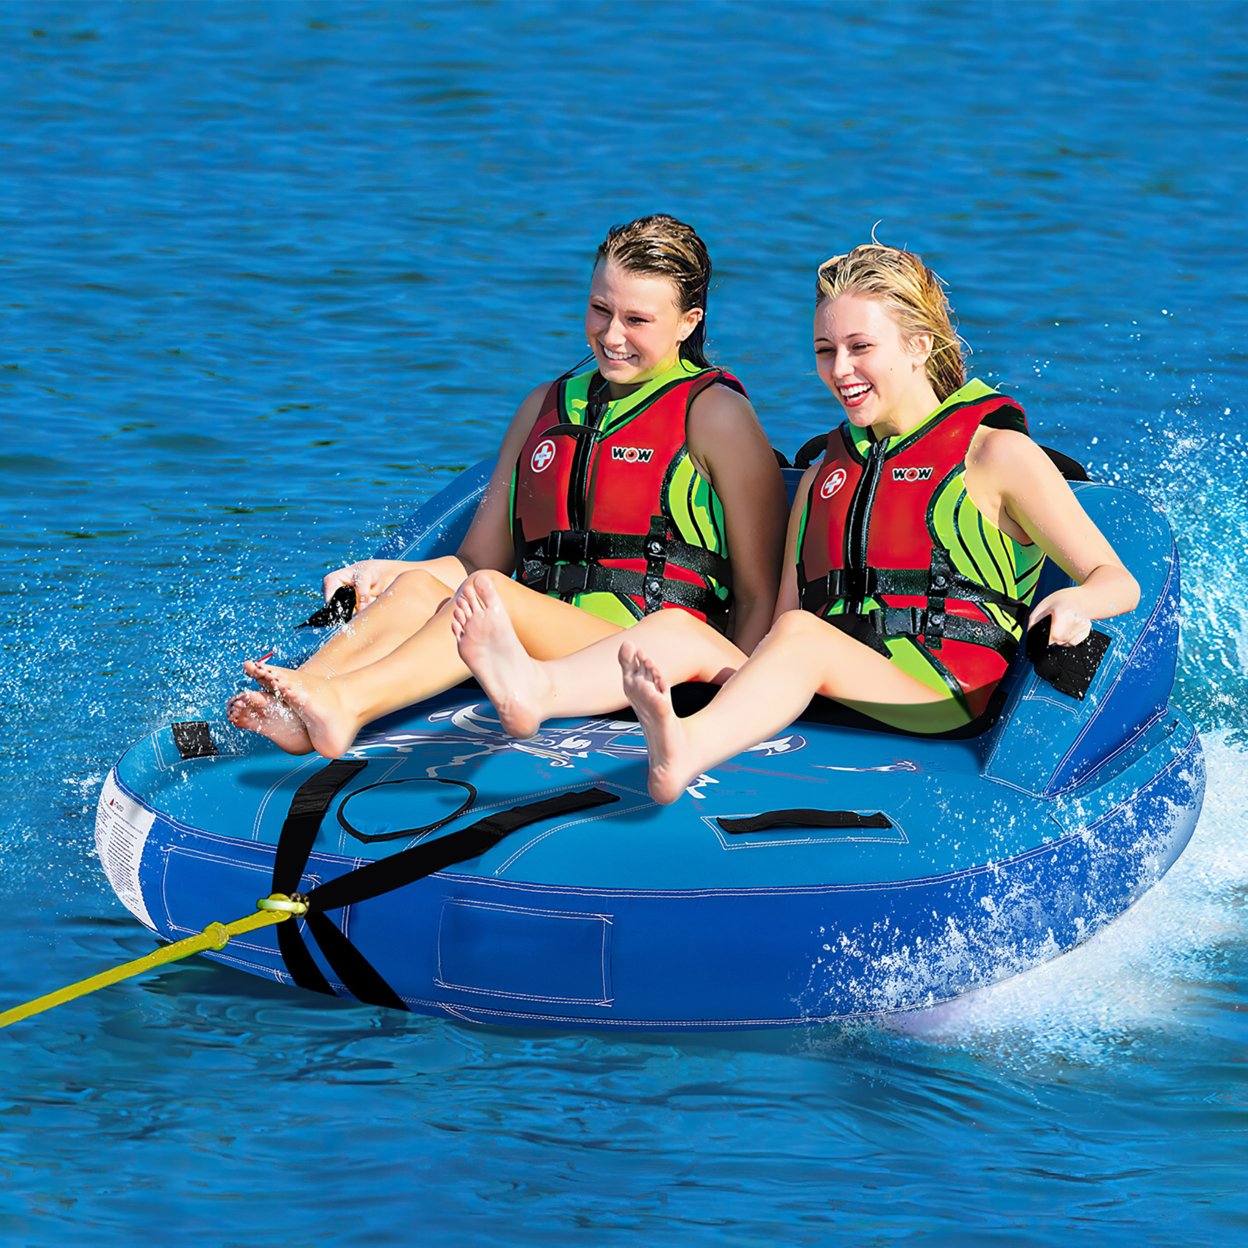 2 Person Inflatable Towable Tubes For Boating Water Tubes For Boats To Pull